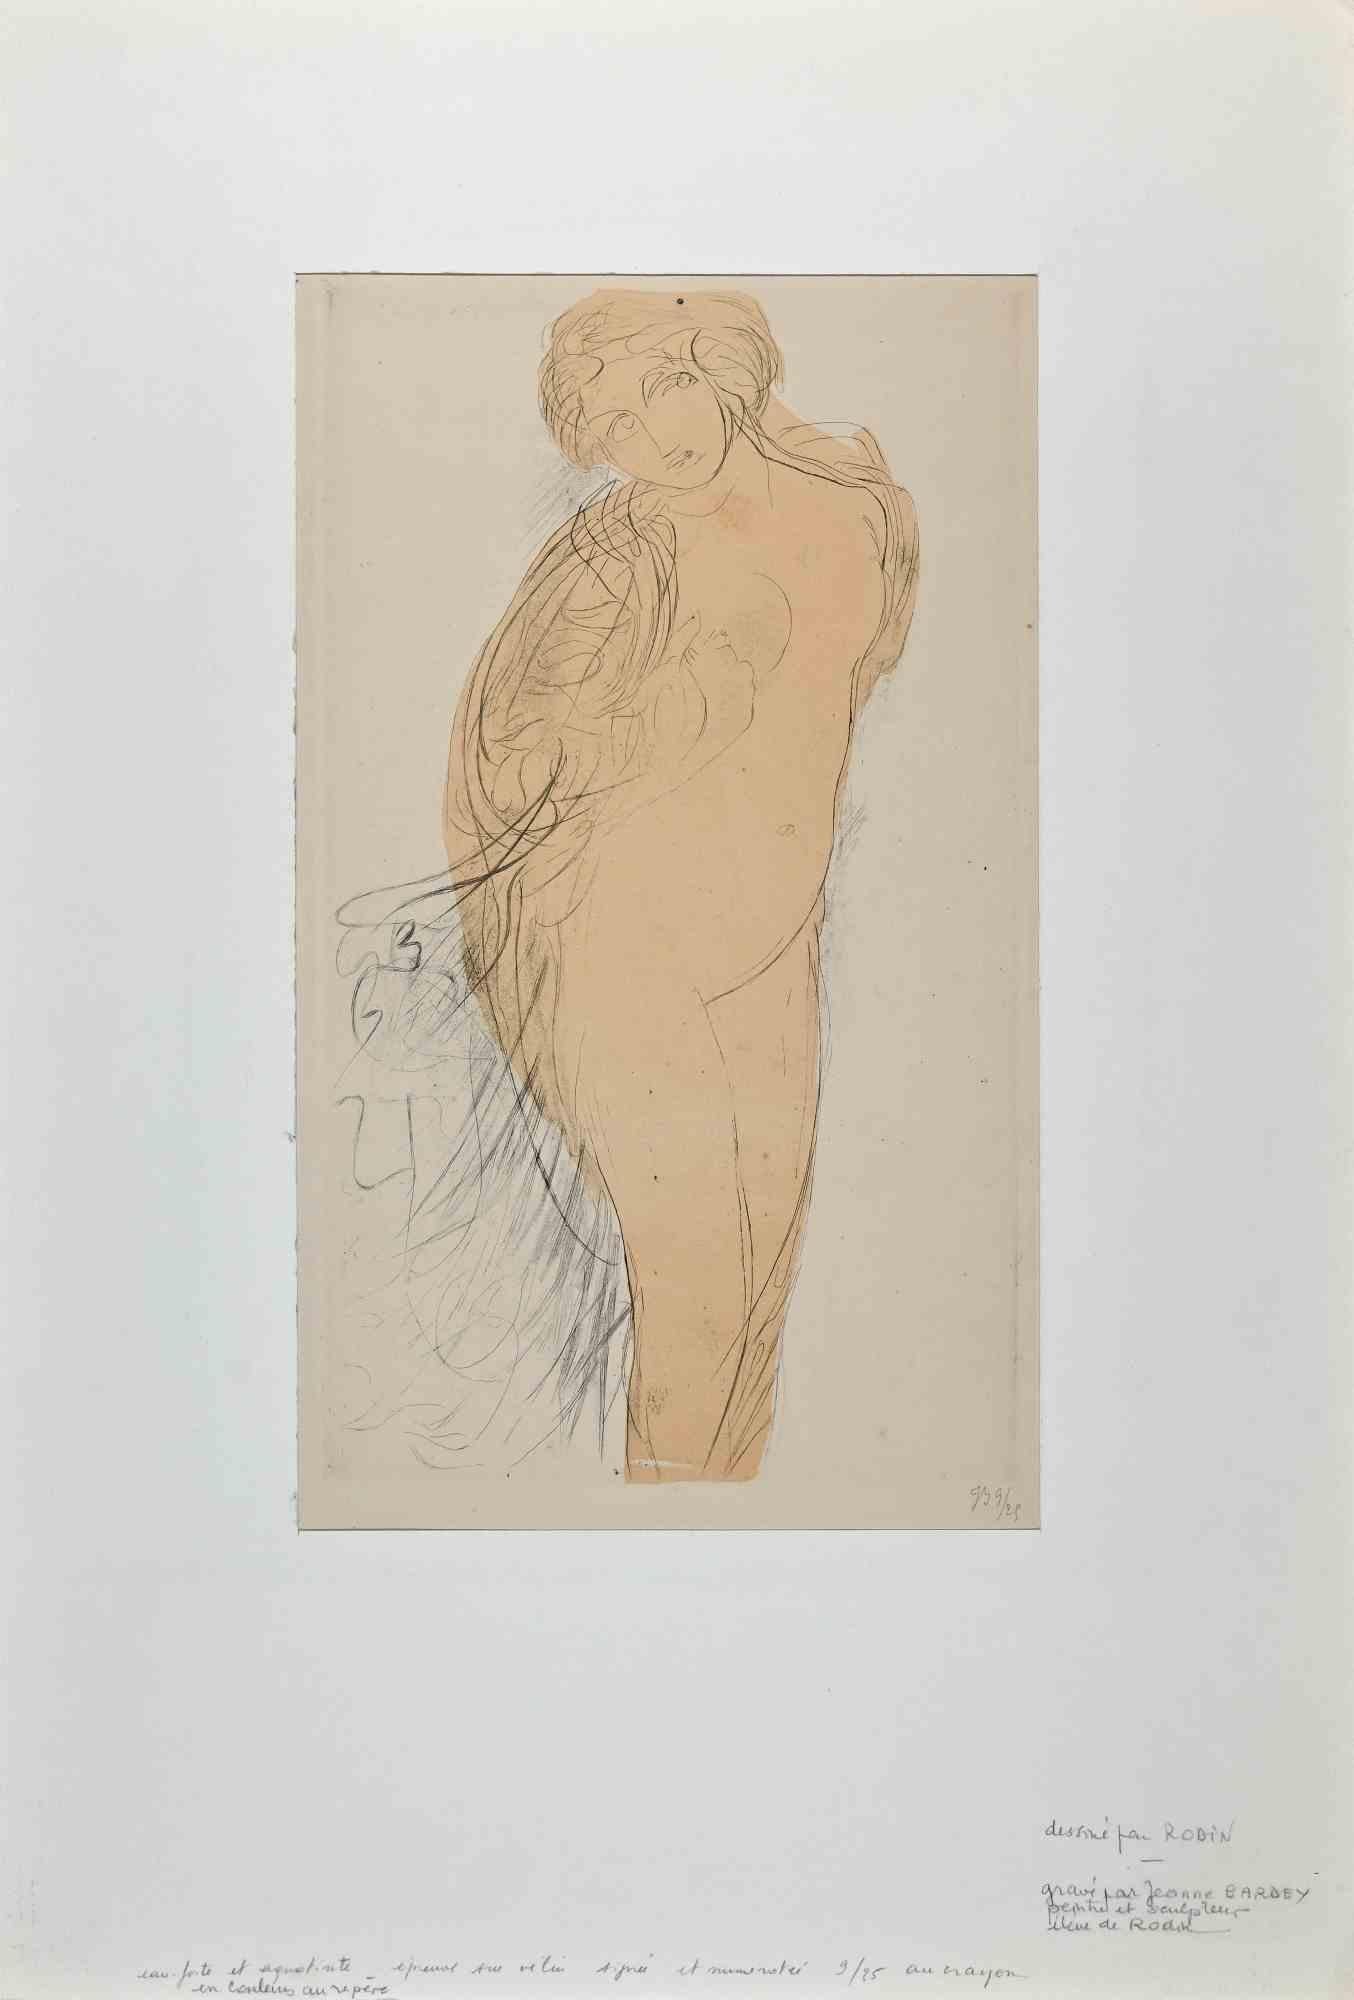 Woman is an original etching realized in Early 20th Century after Auguste Rodin by French artist  Jeanne Bardey (1872 - 1954)

Numbered.Edition, 9/25.

Good conditions.

Jeanne Bardey (1872 - 1954) was a French painter and sculptor who lived in